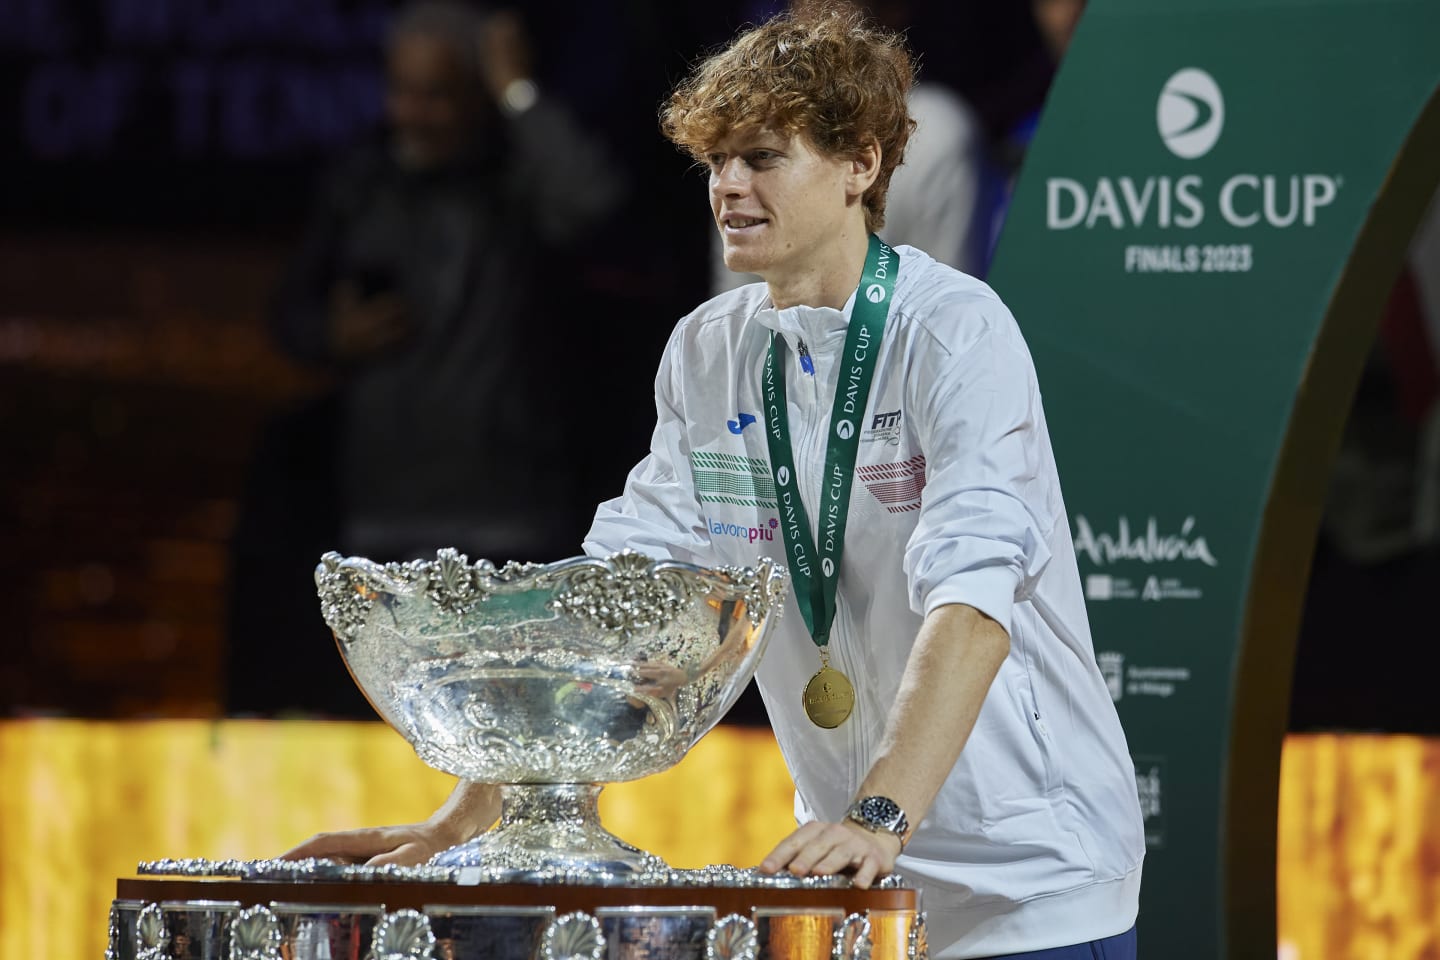 MALAGA, SPAIN - NOVEMBER 26: Jannik Sinner of Italy celebrates with the Davis Cup Trophy after